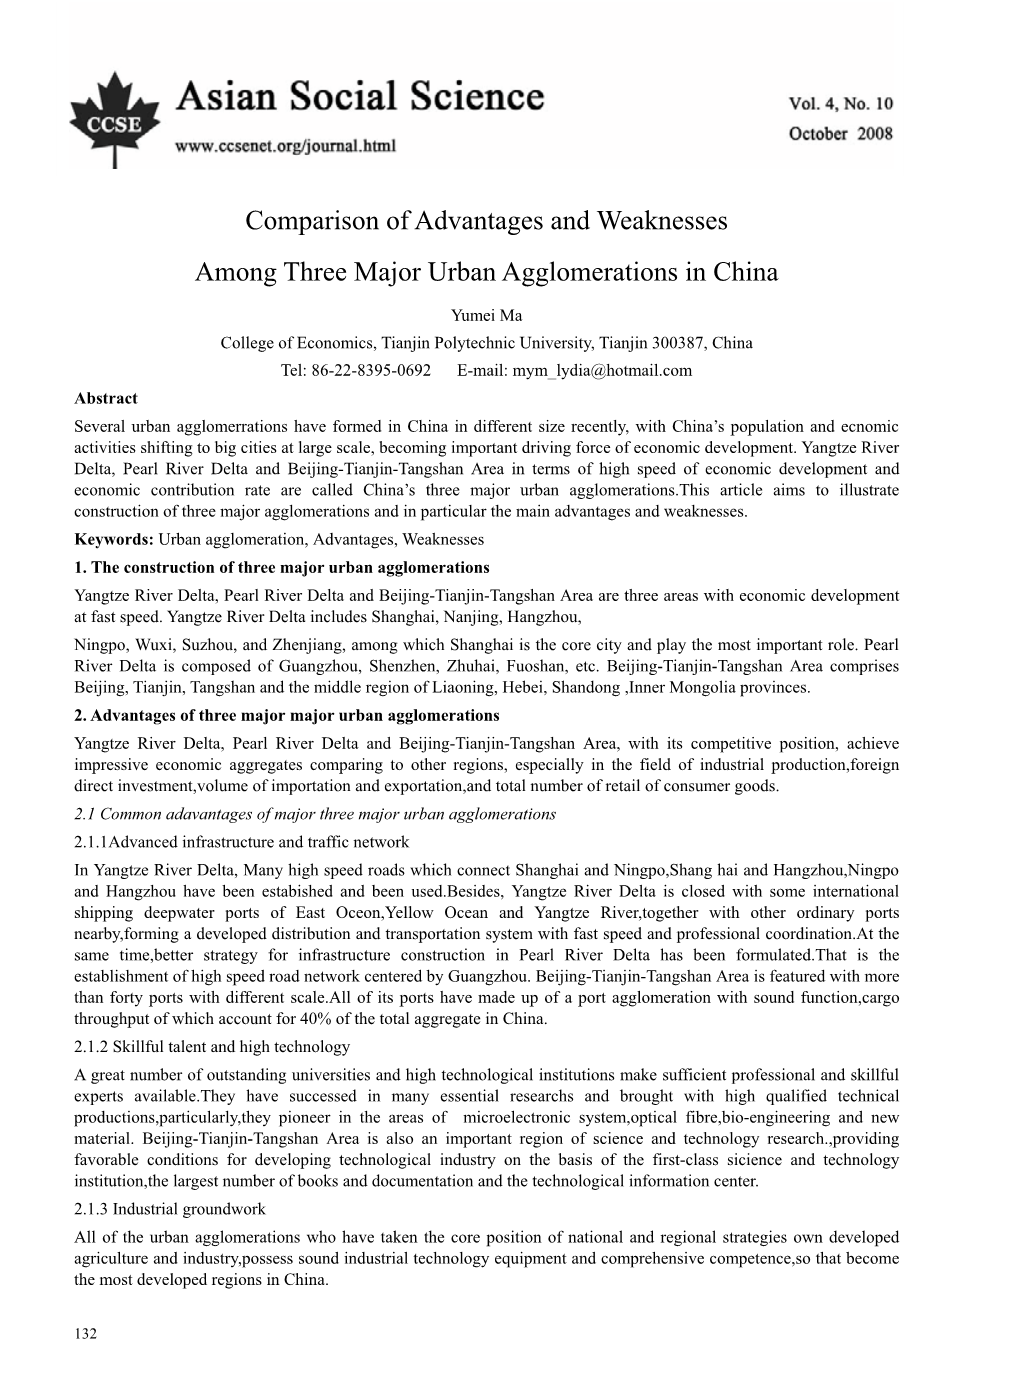 Comparison of Advantages and Weaknesses Among Three Major Urban Agglomerations in China